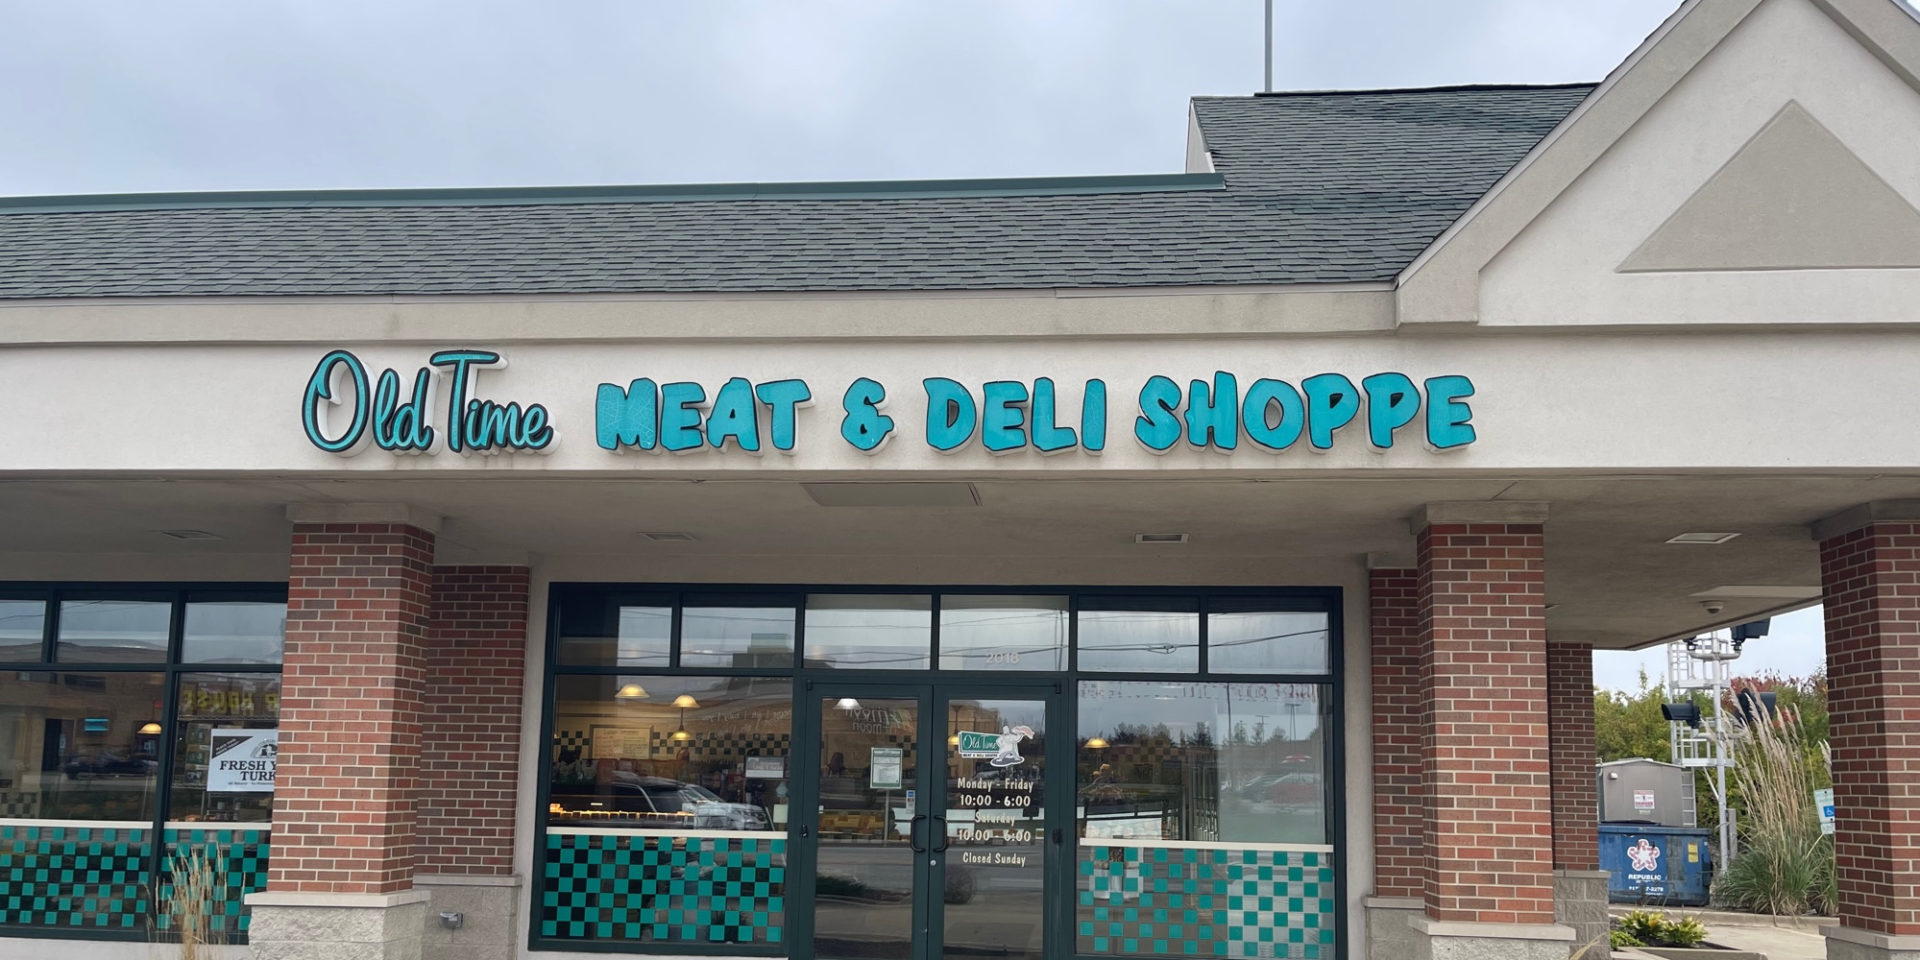 Old Time Meat & Deli has fantastically fresh meat, seafood, and potatoes